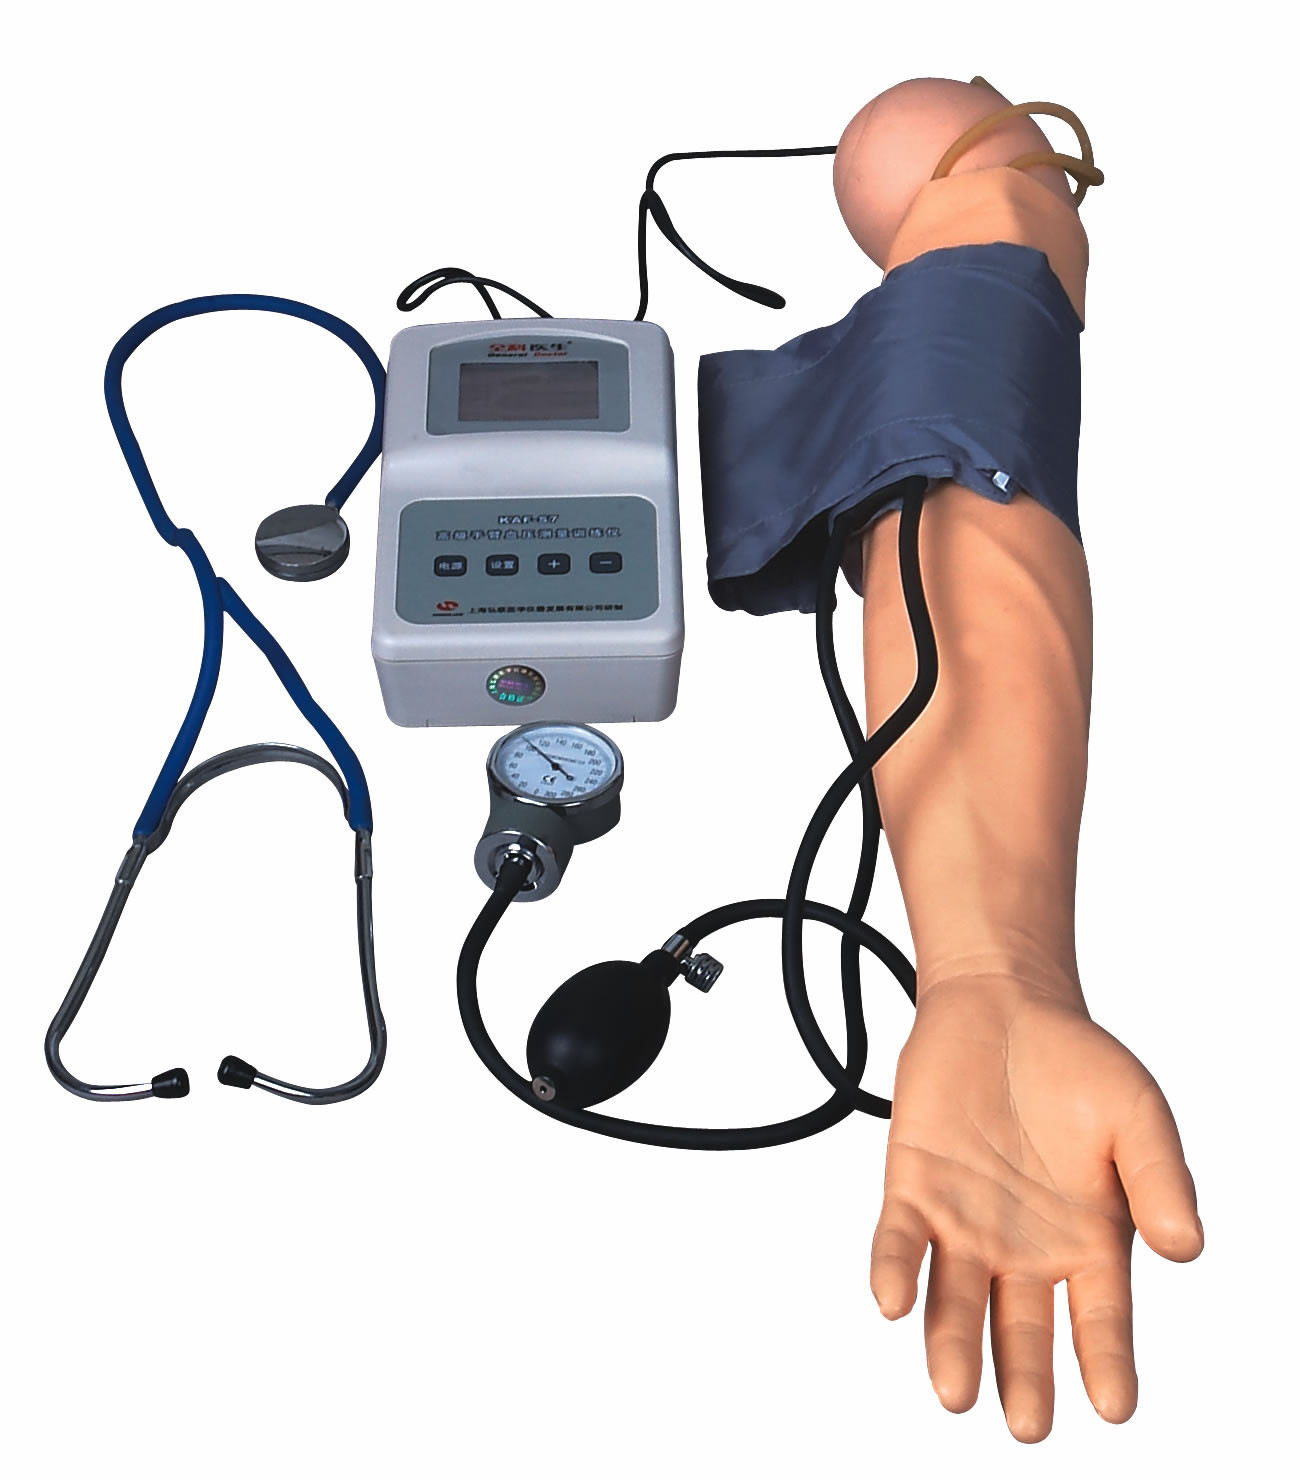 BP Measurement Arm With Exercise Blood Pressure model For Medical Colleges And Schools